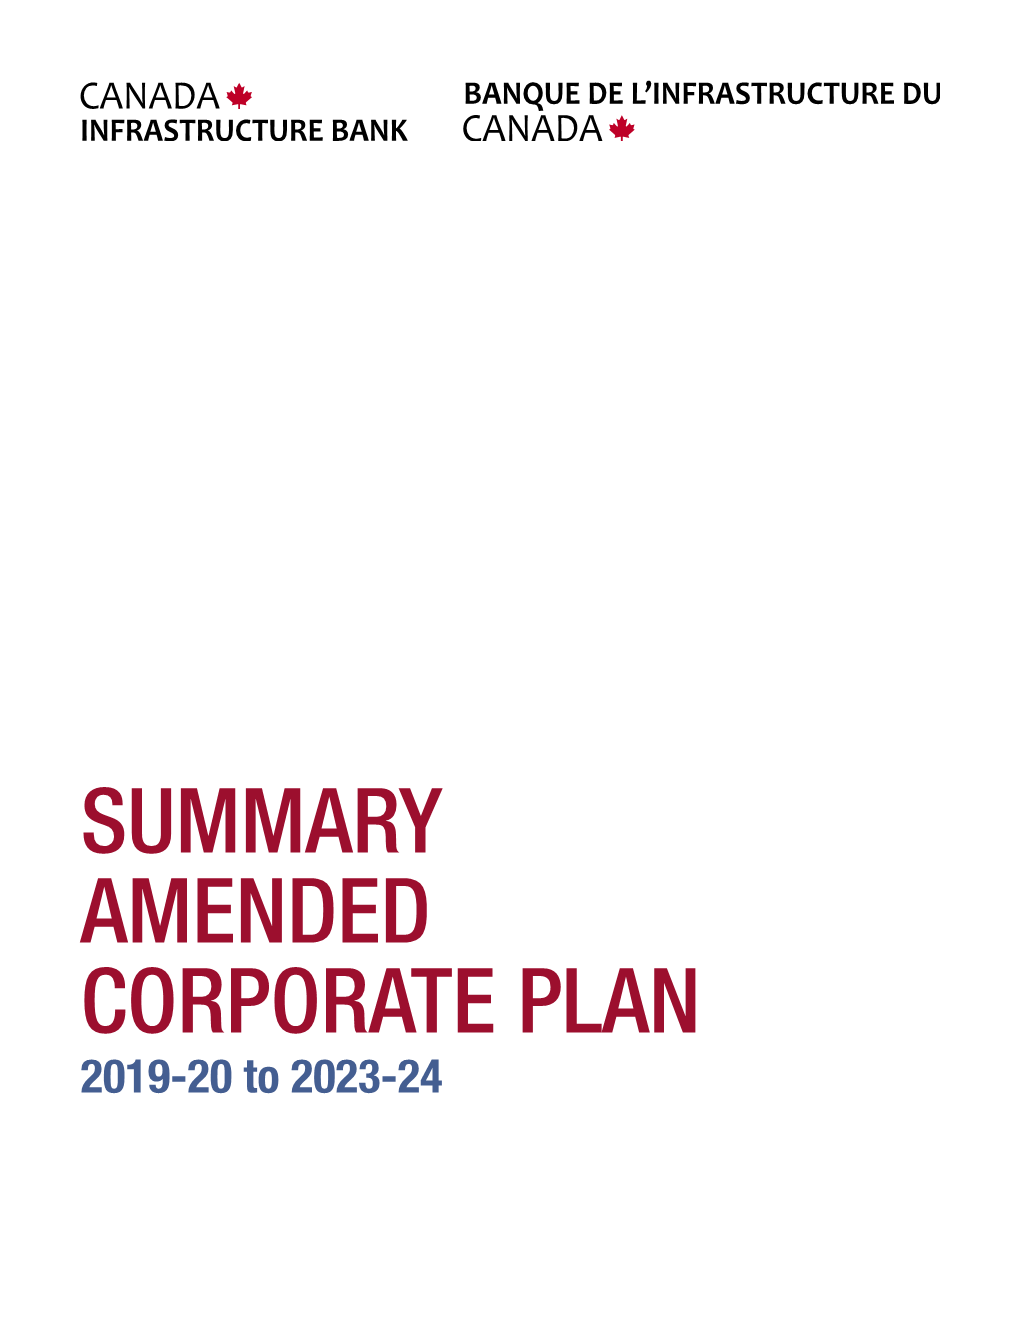 Canada Infrastructure Bank, Summary Corporate Plan 2019-20 to 2023-24